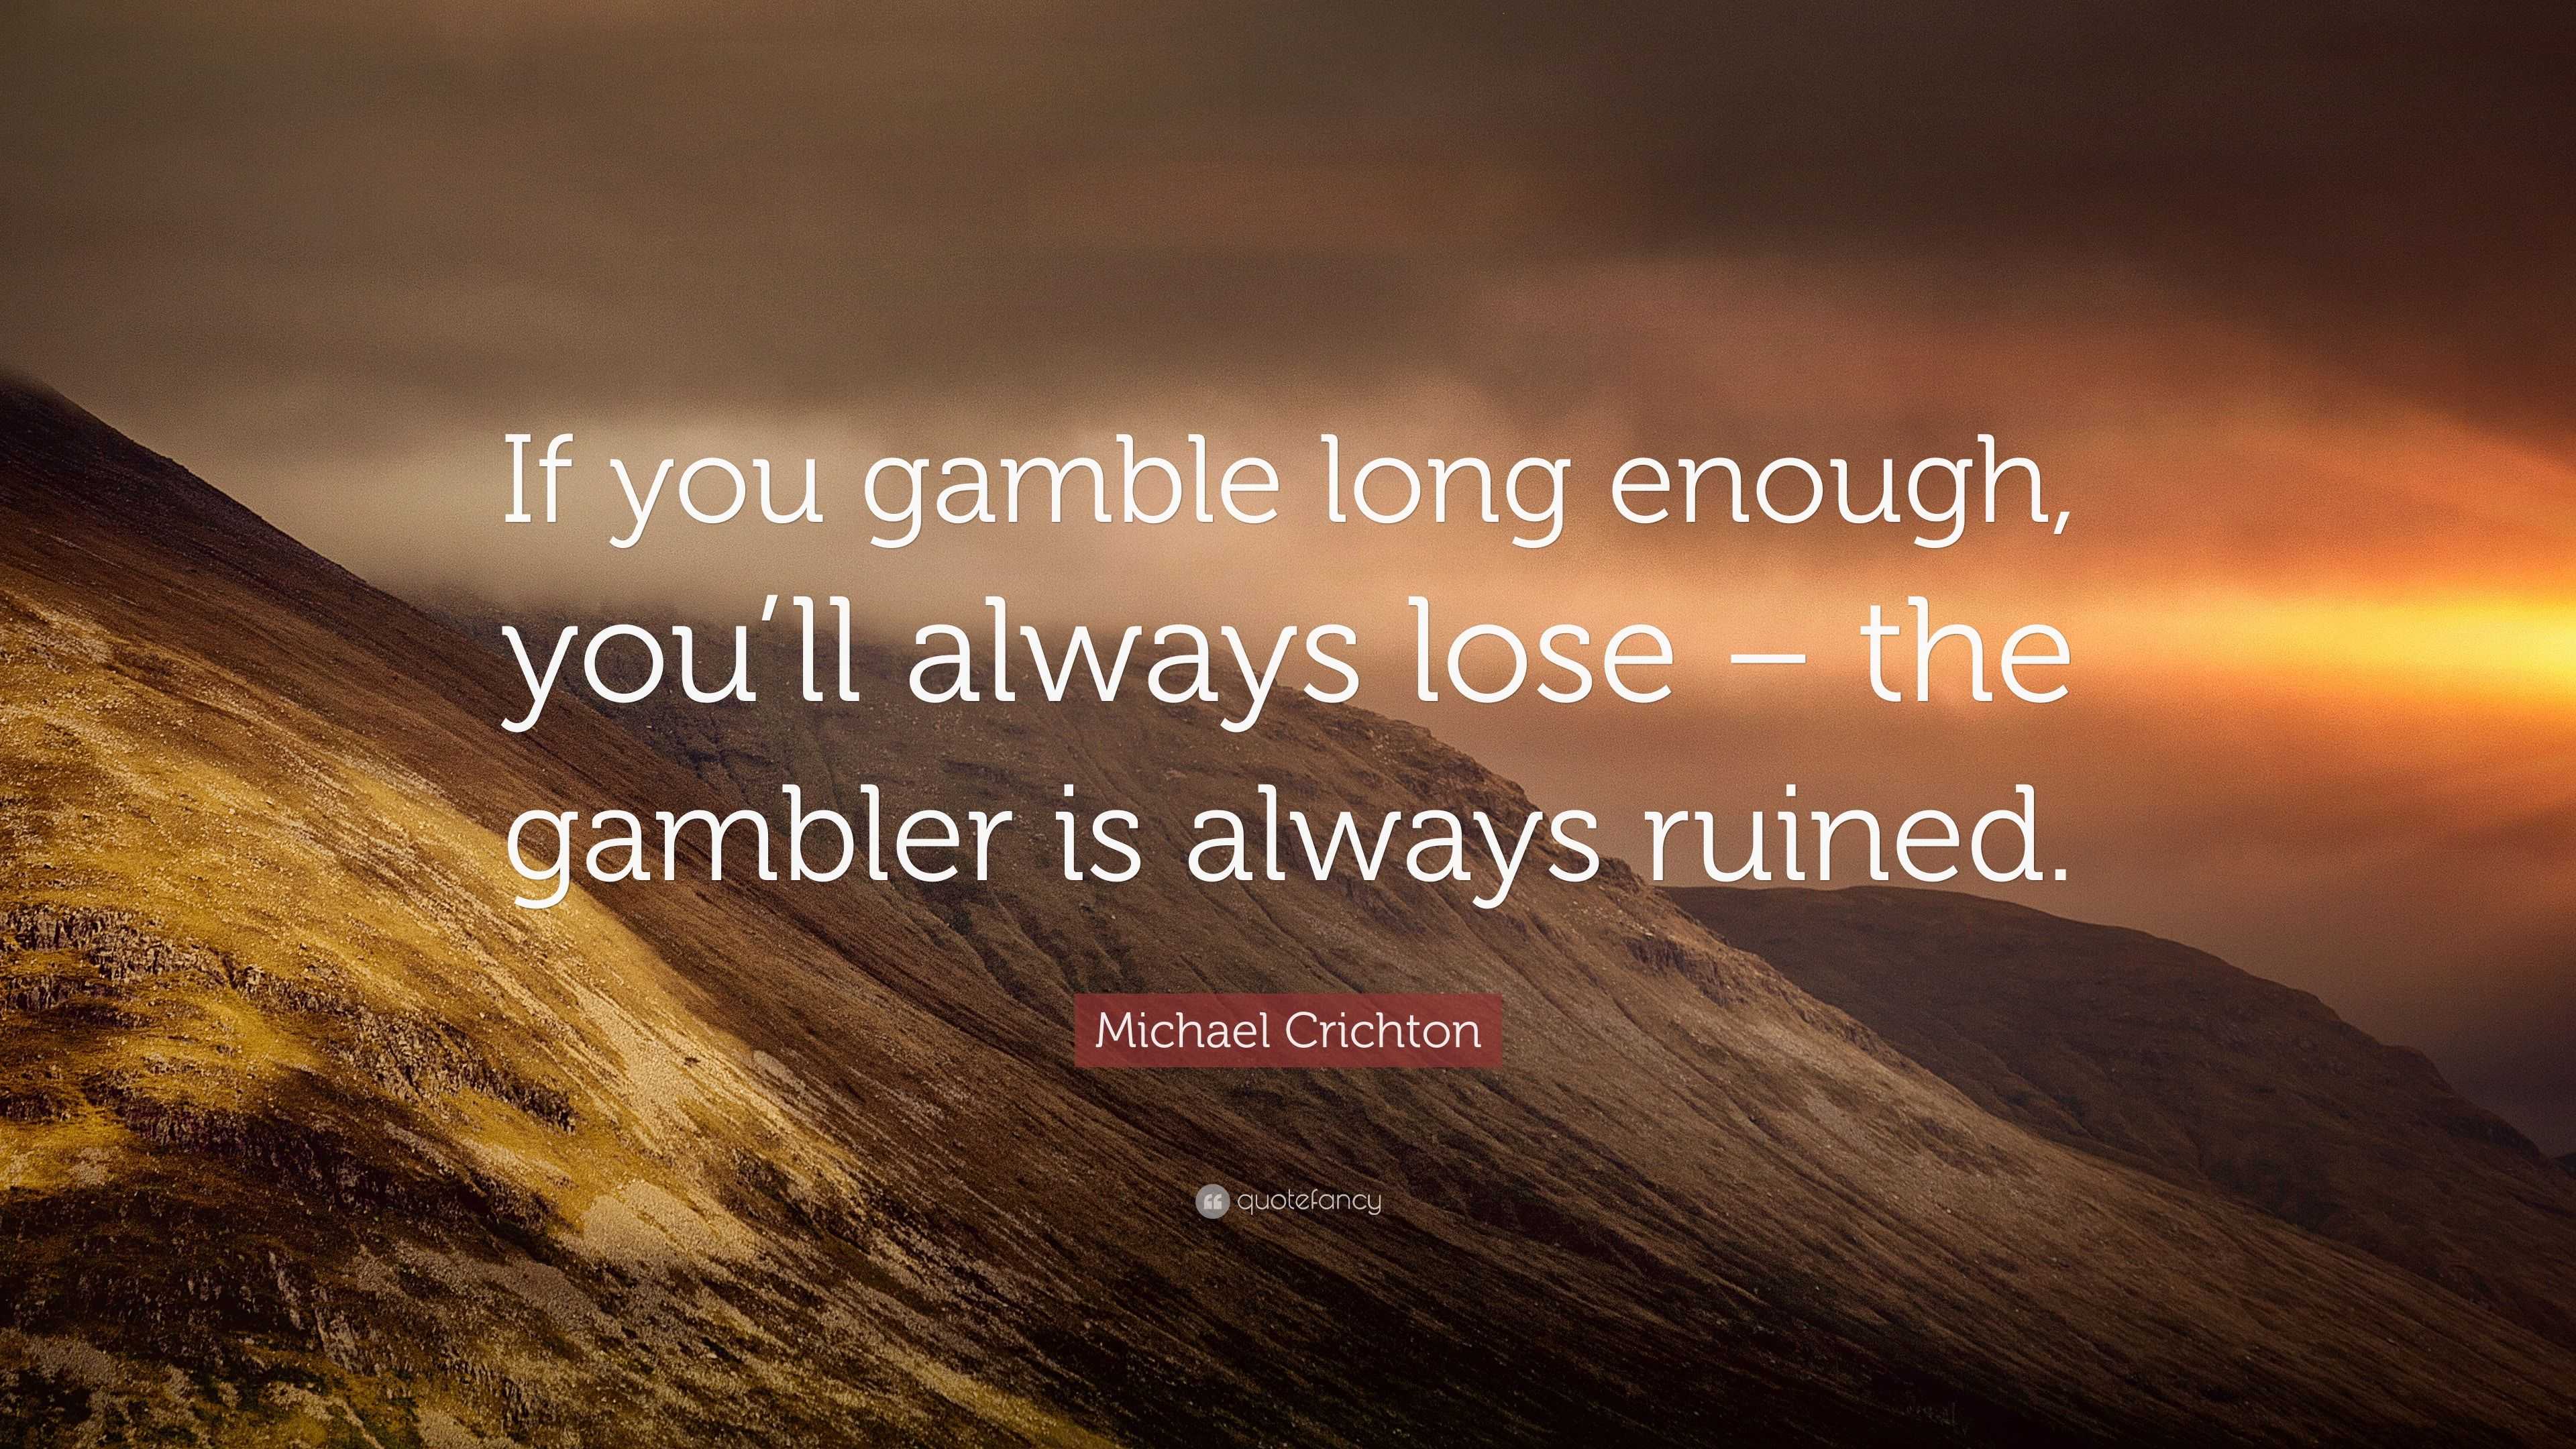 Whenever you gamble my friend, eventually you'll lose. - MagicalQuote